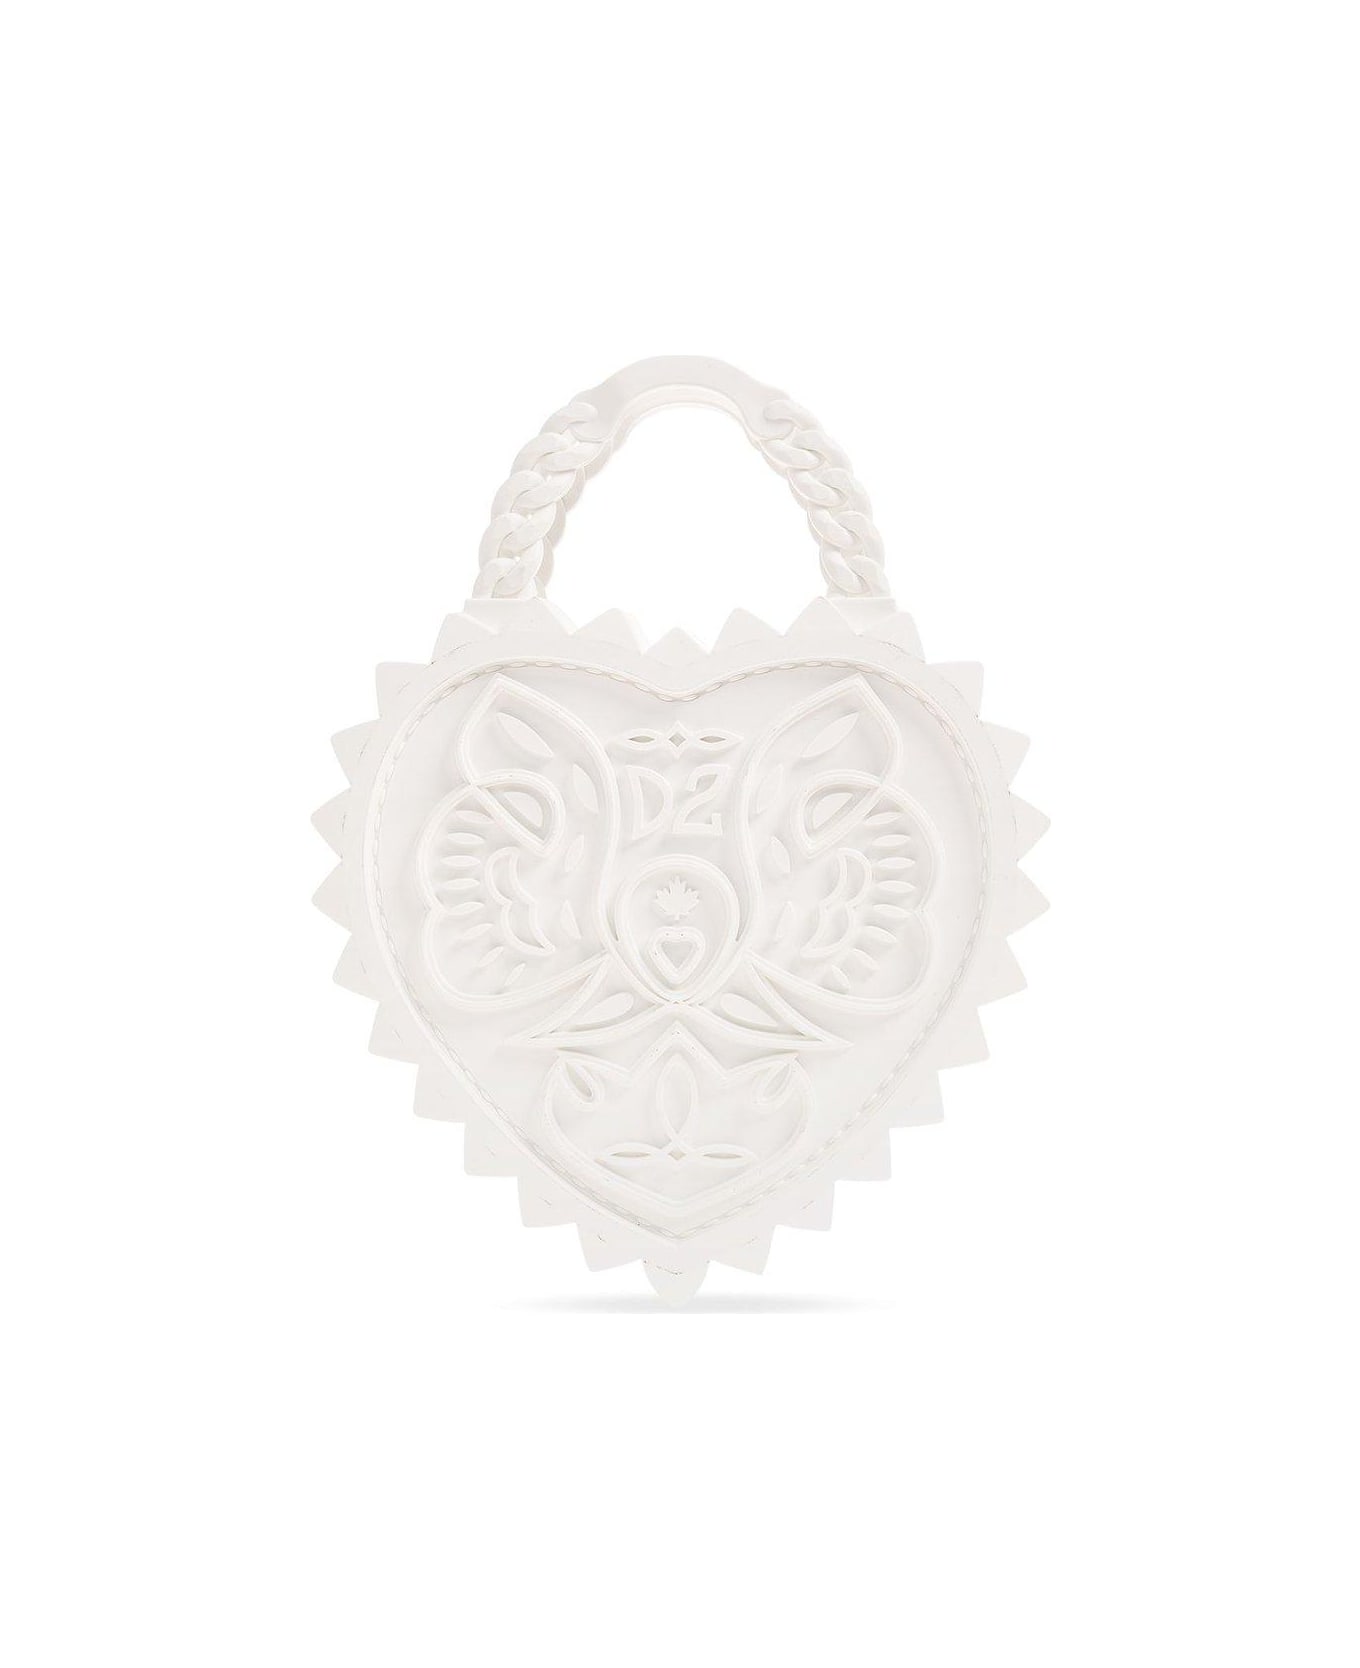 Dsquared2 Open Your Heart Top Handle Bag - Bianco